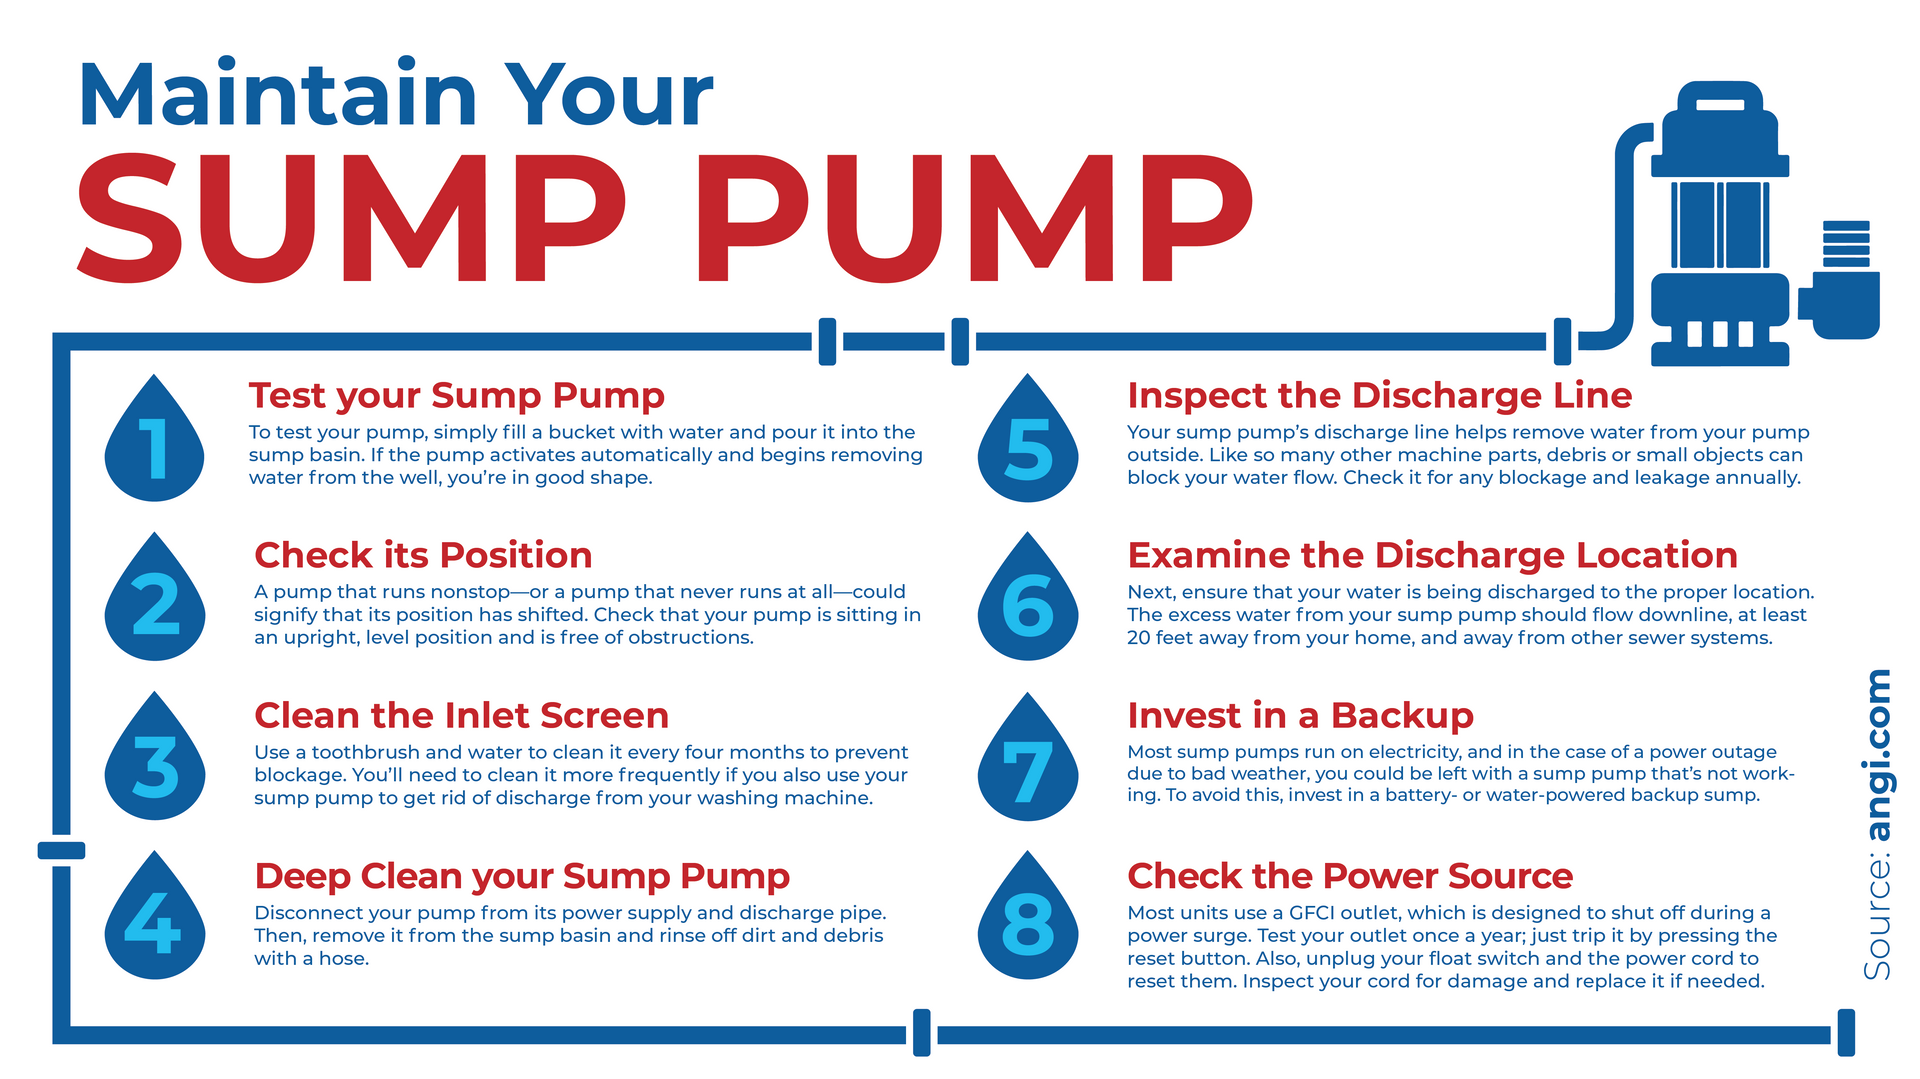 Maintian your sump pump image with steps of instructions